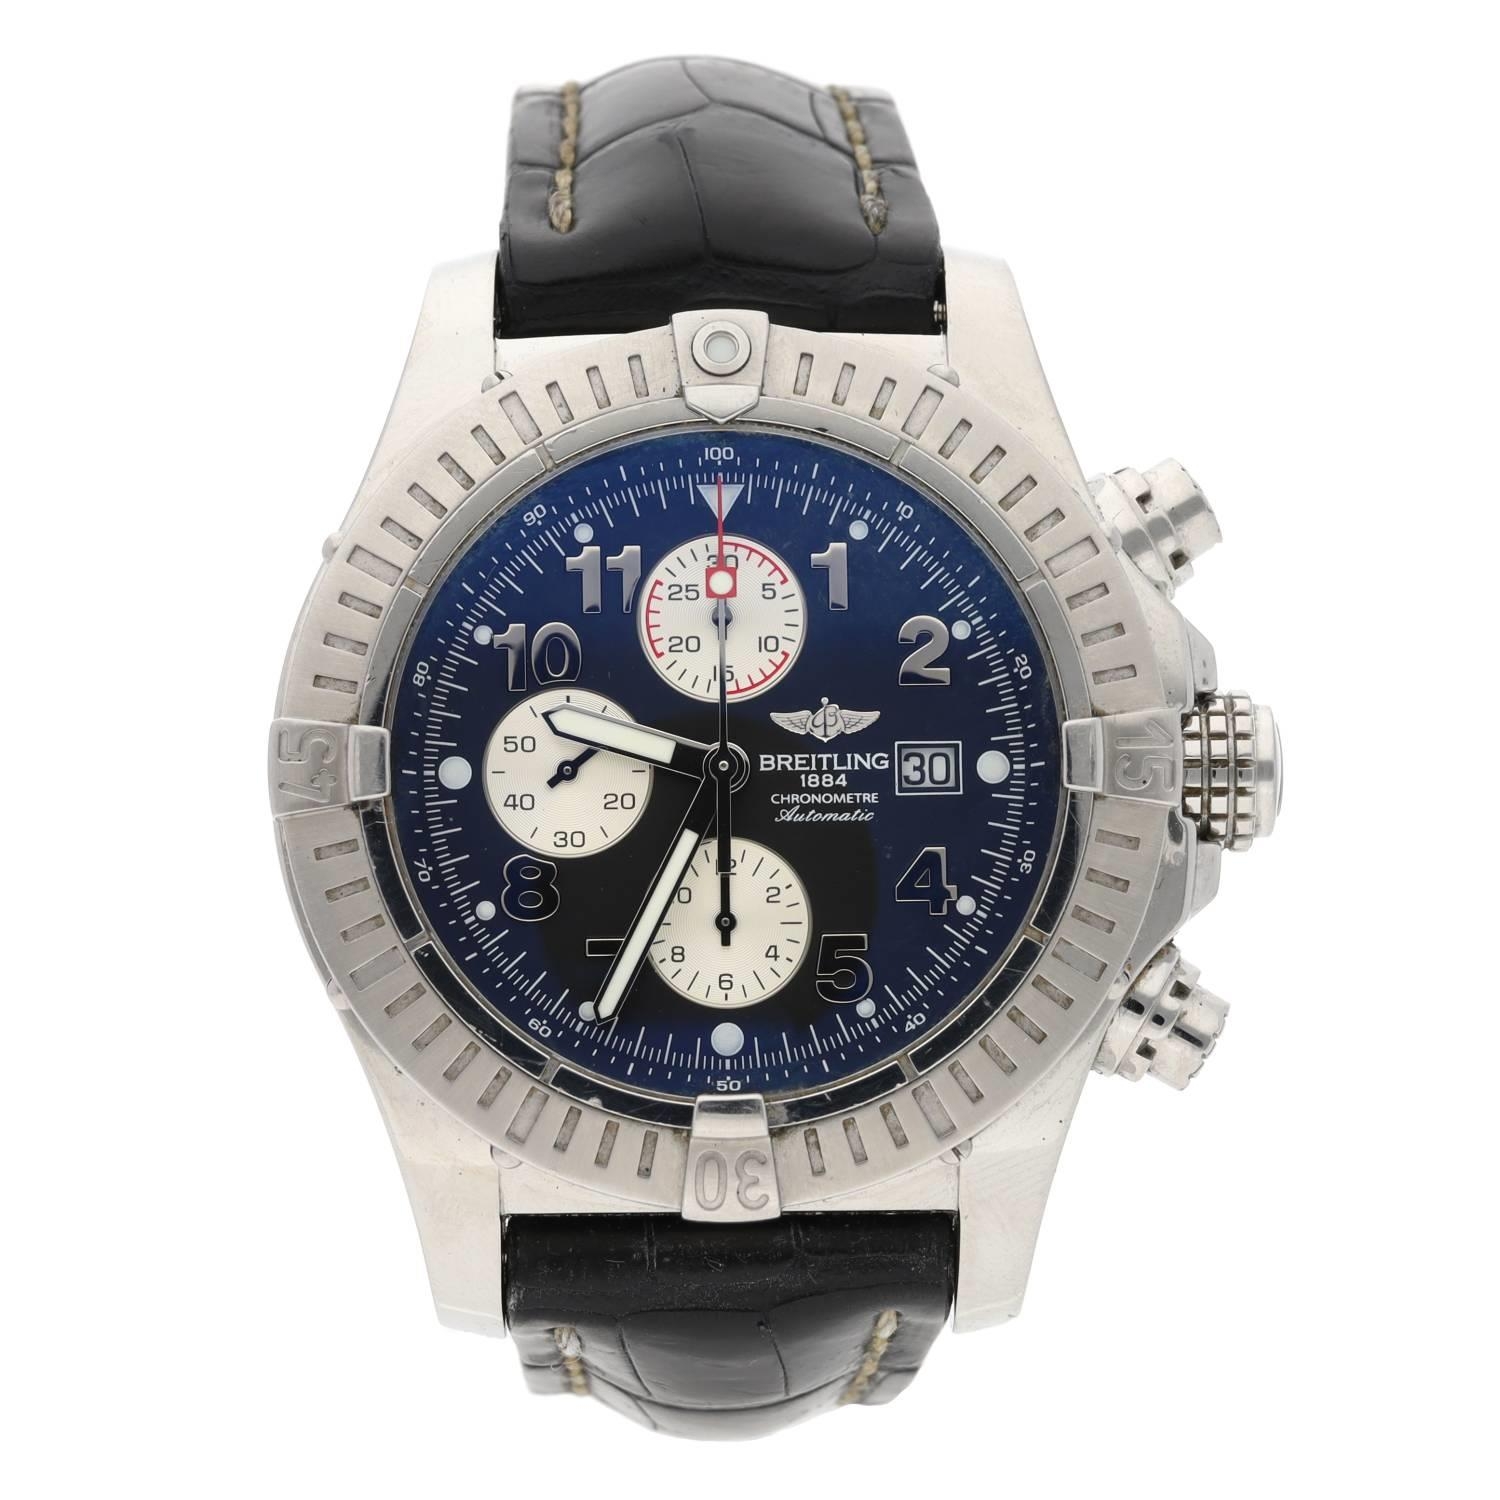 Breitling Super Avenger Chronometre Chronograph automatic stainless steel gentleman's wristwatch, - Image 2 of 4